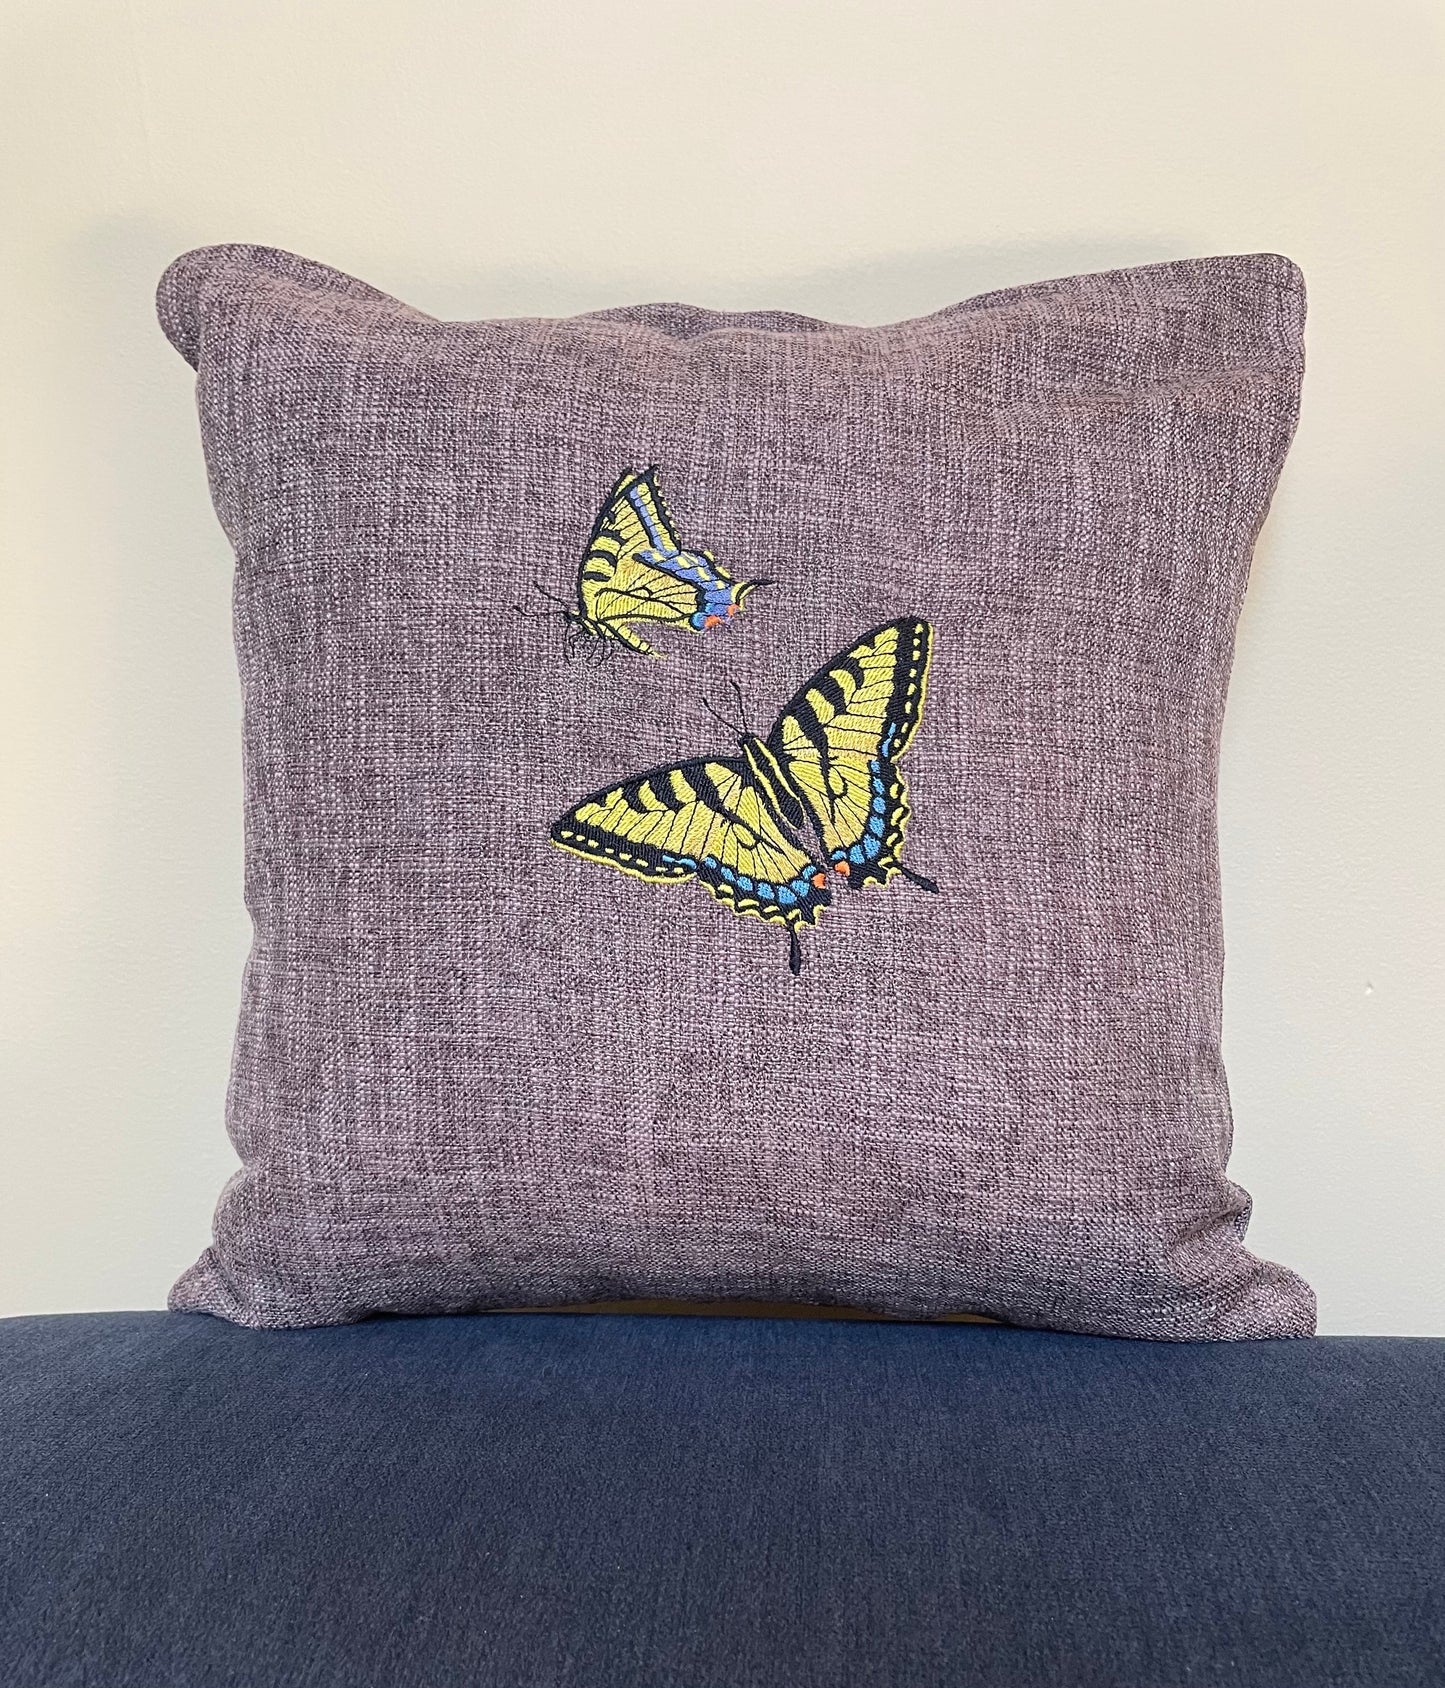 Swallowtail Butterfly Embroidered Throw Pillow Cover 16" x 16" Cotton